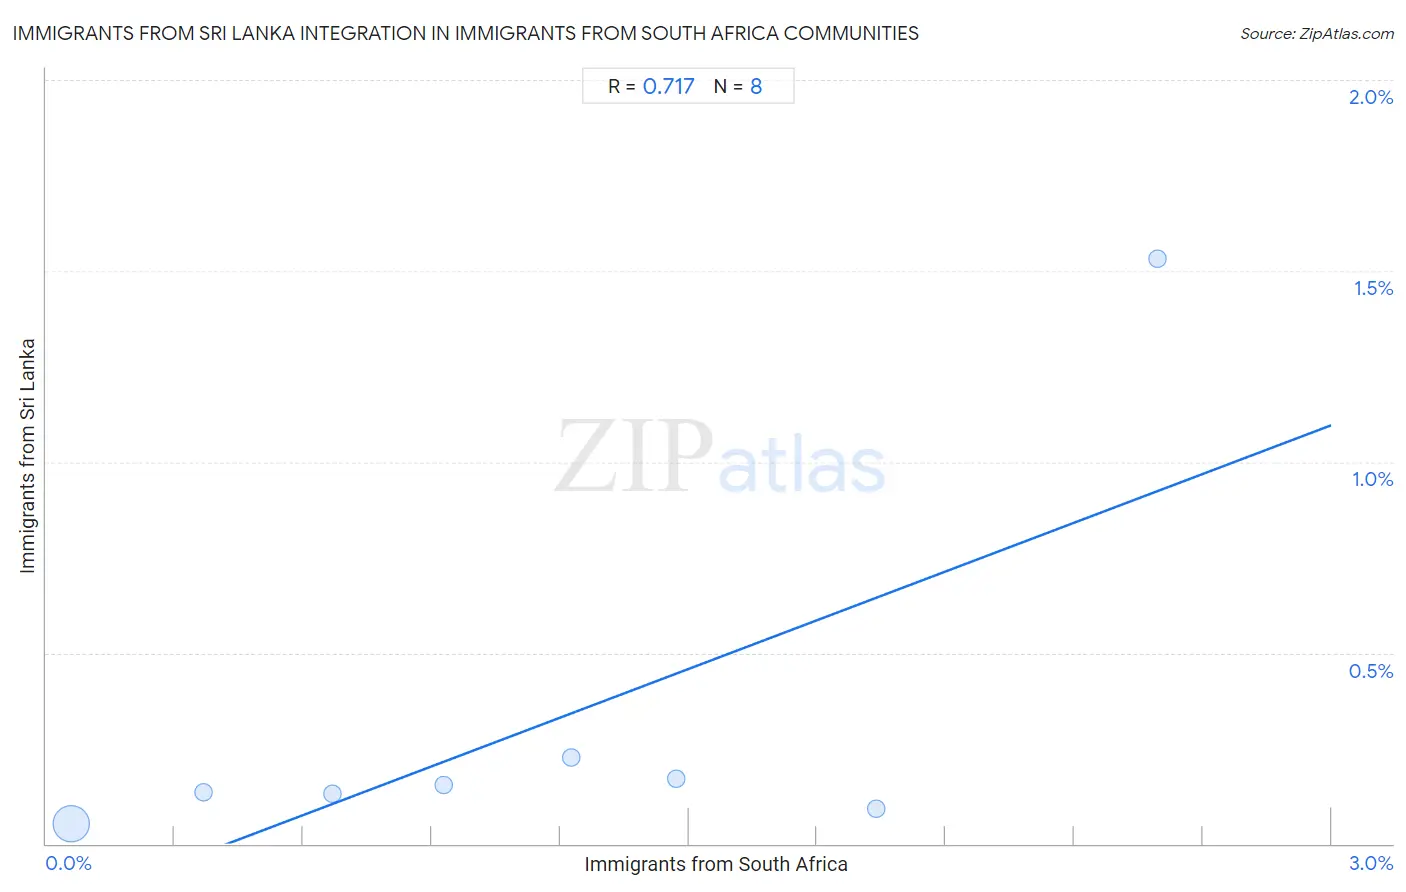 Immigrants from South Africa Integration in Immigrants from Sri Lanka Communities